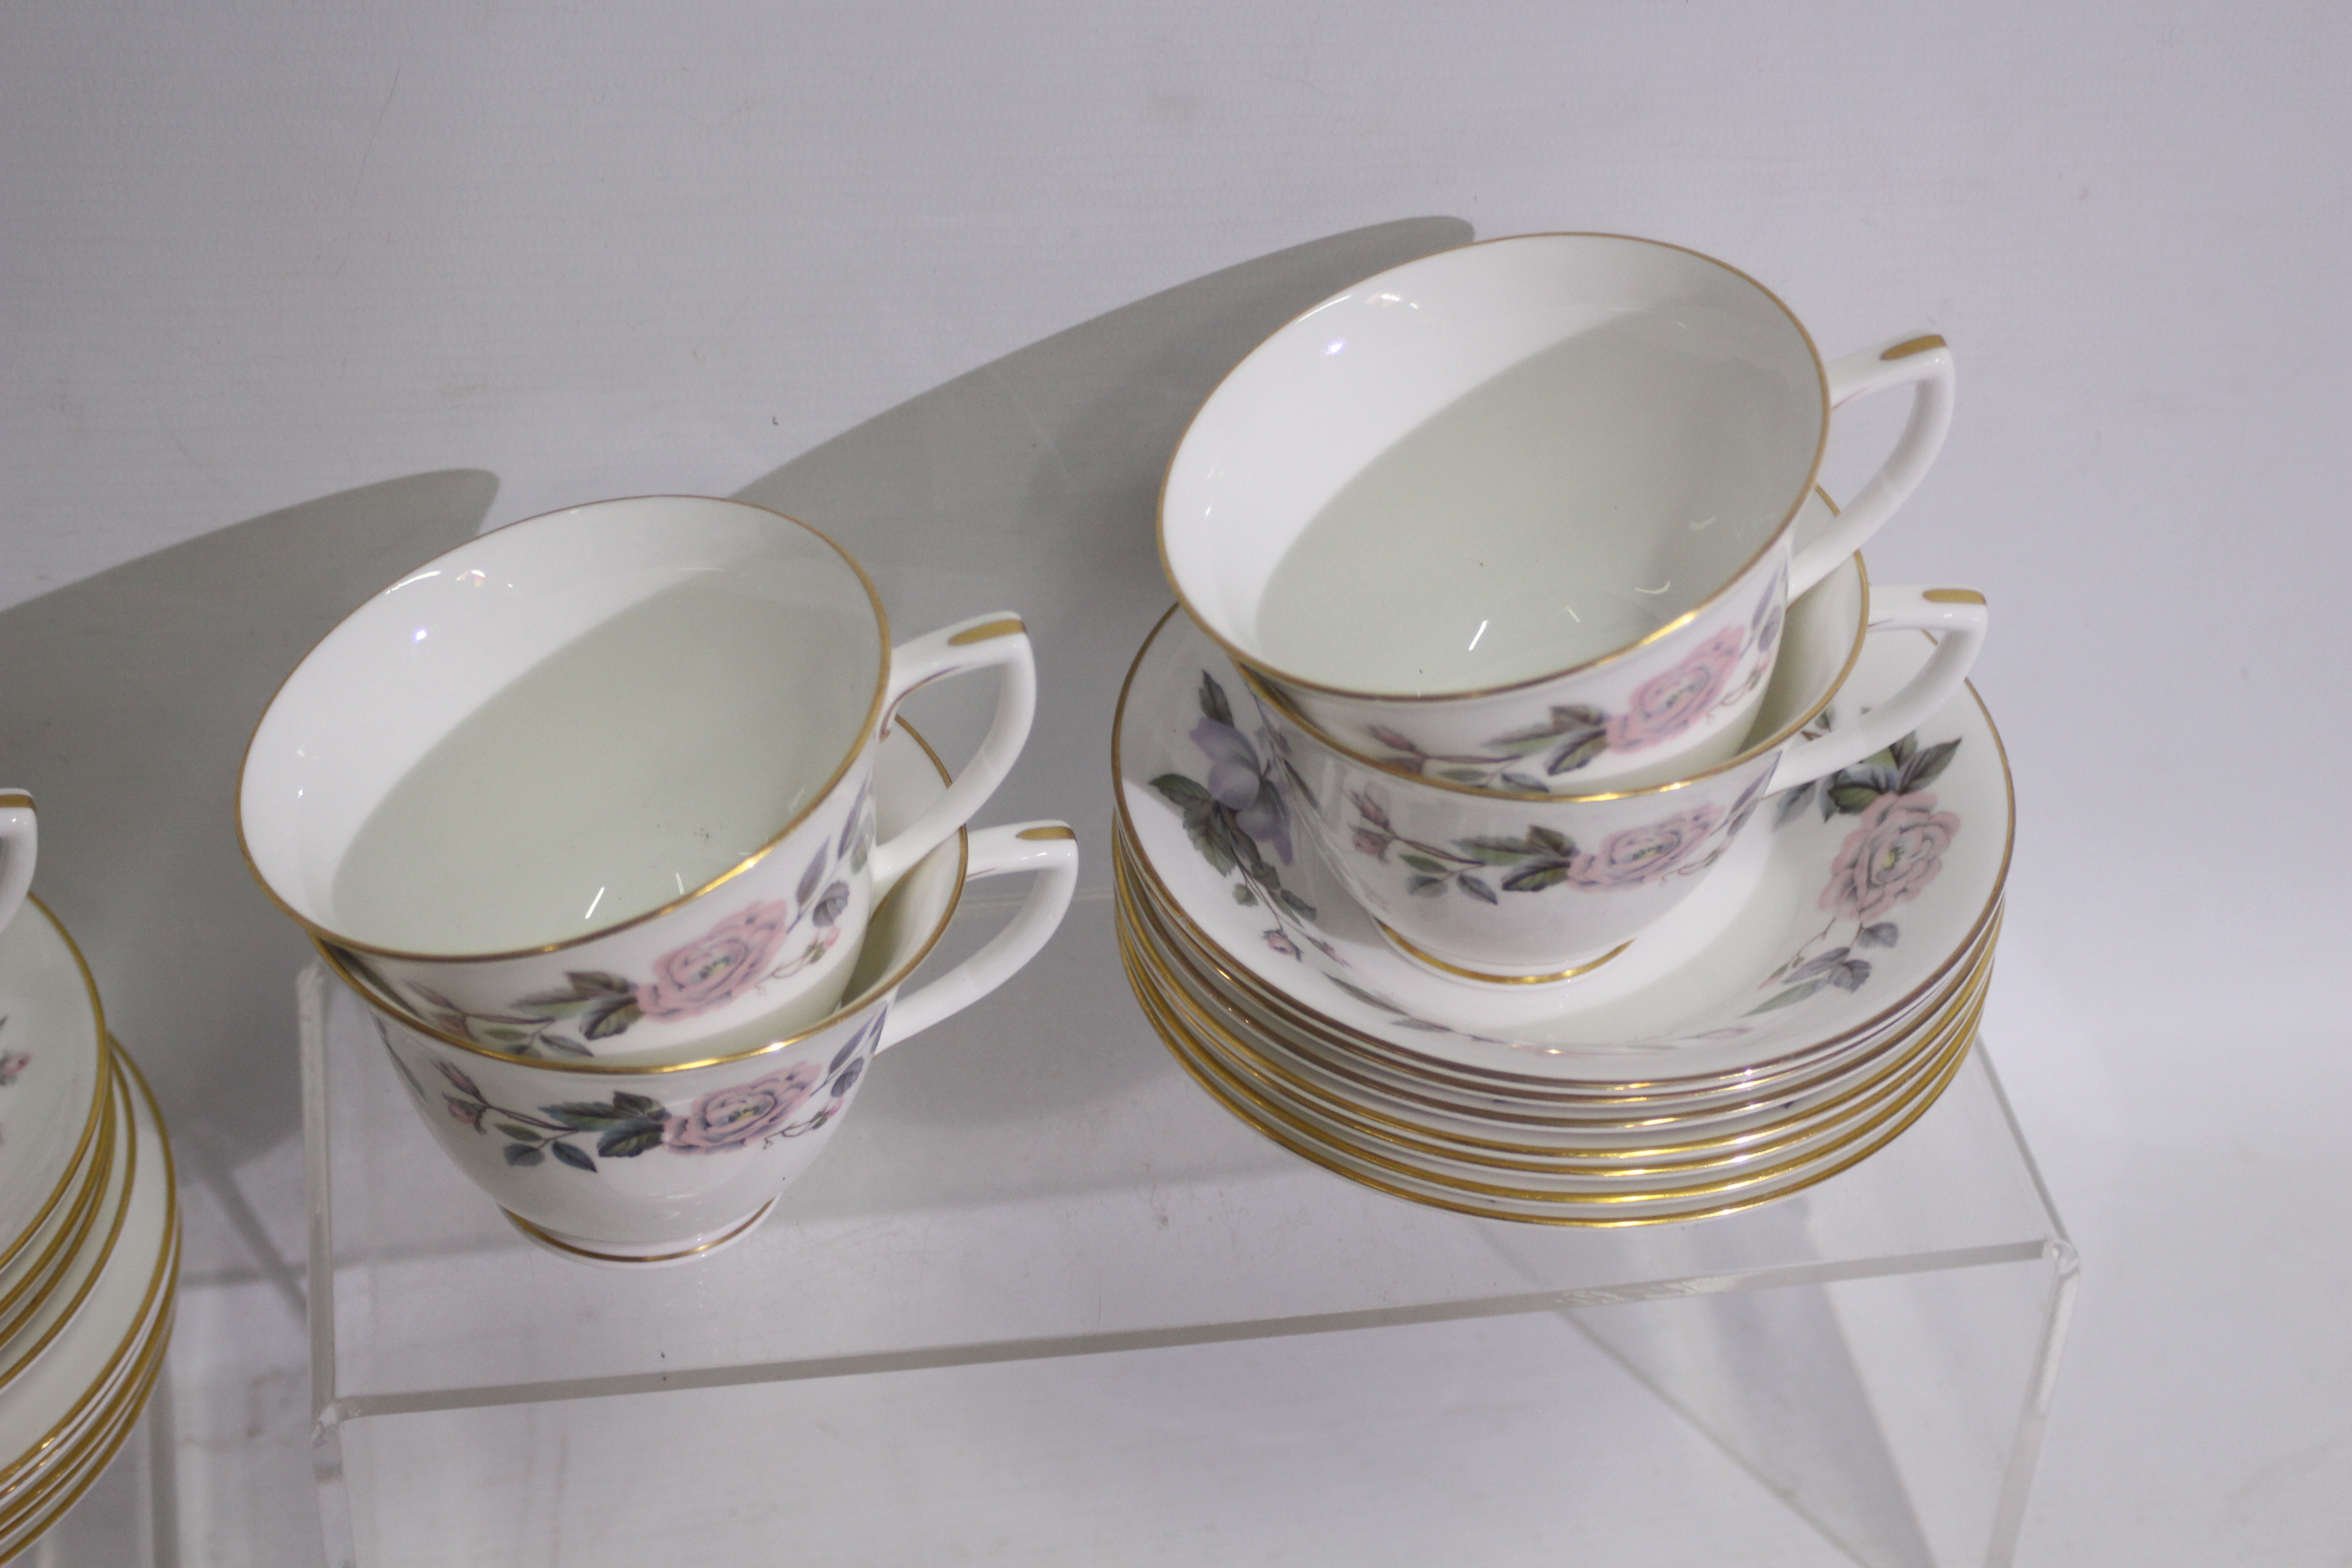 Royal Worcester - A collection of dinner and tea wares in the June Garland pattern, - Image 8 of 8